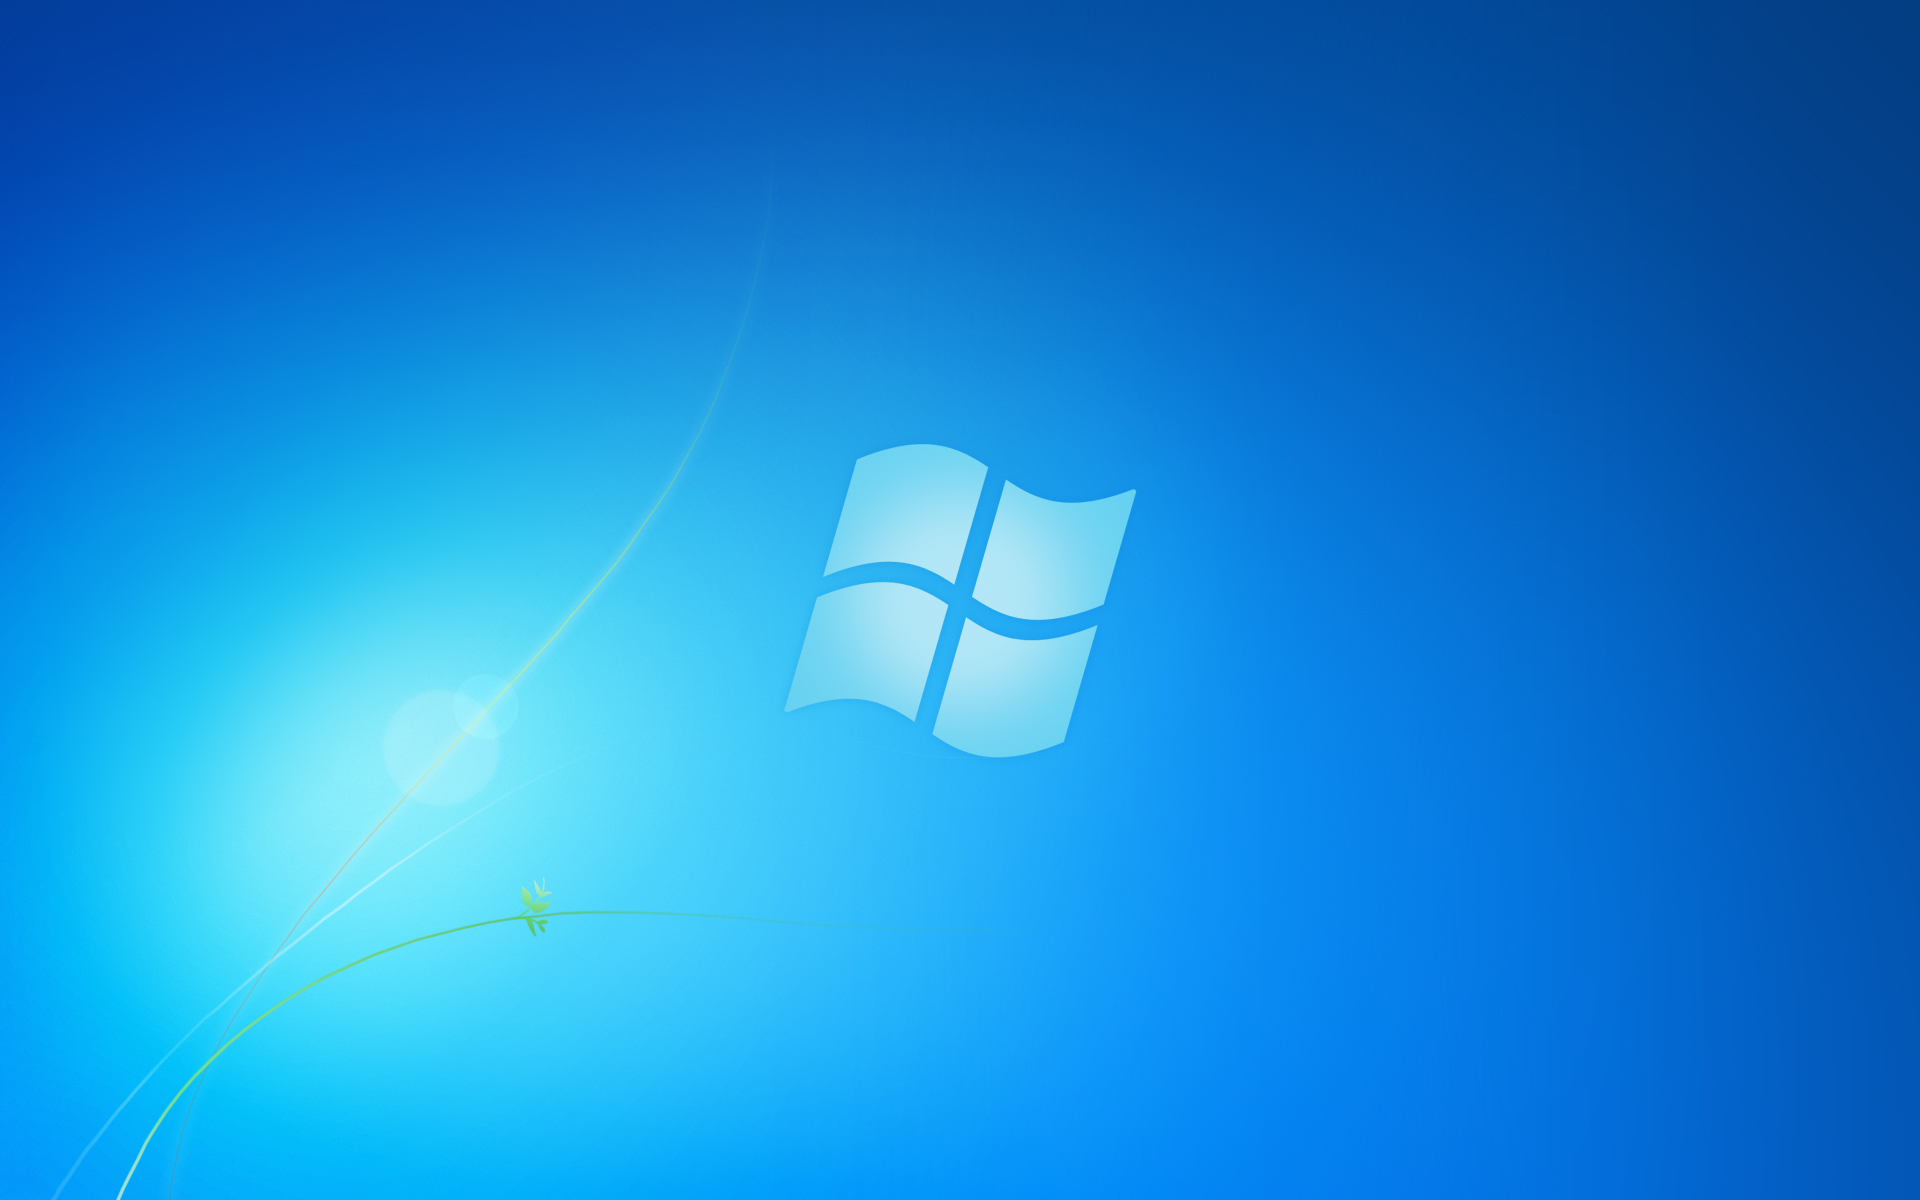 Change Windows Starter Edition Wallpaper Easily With